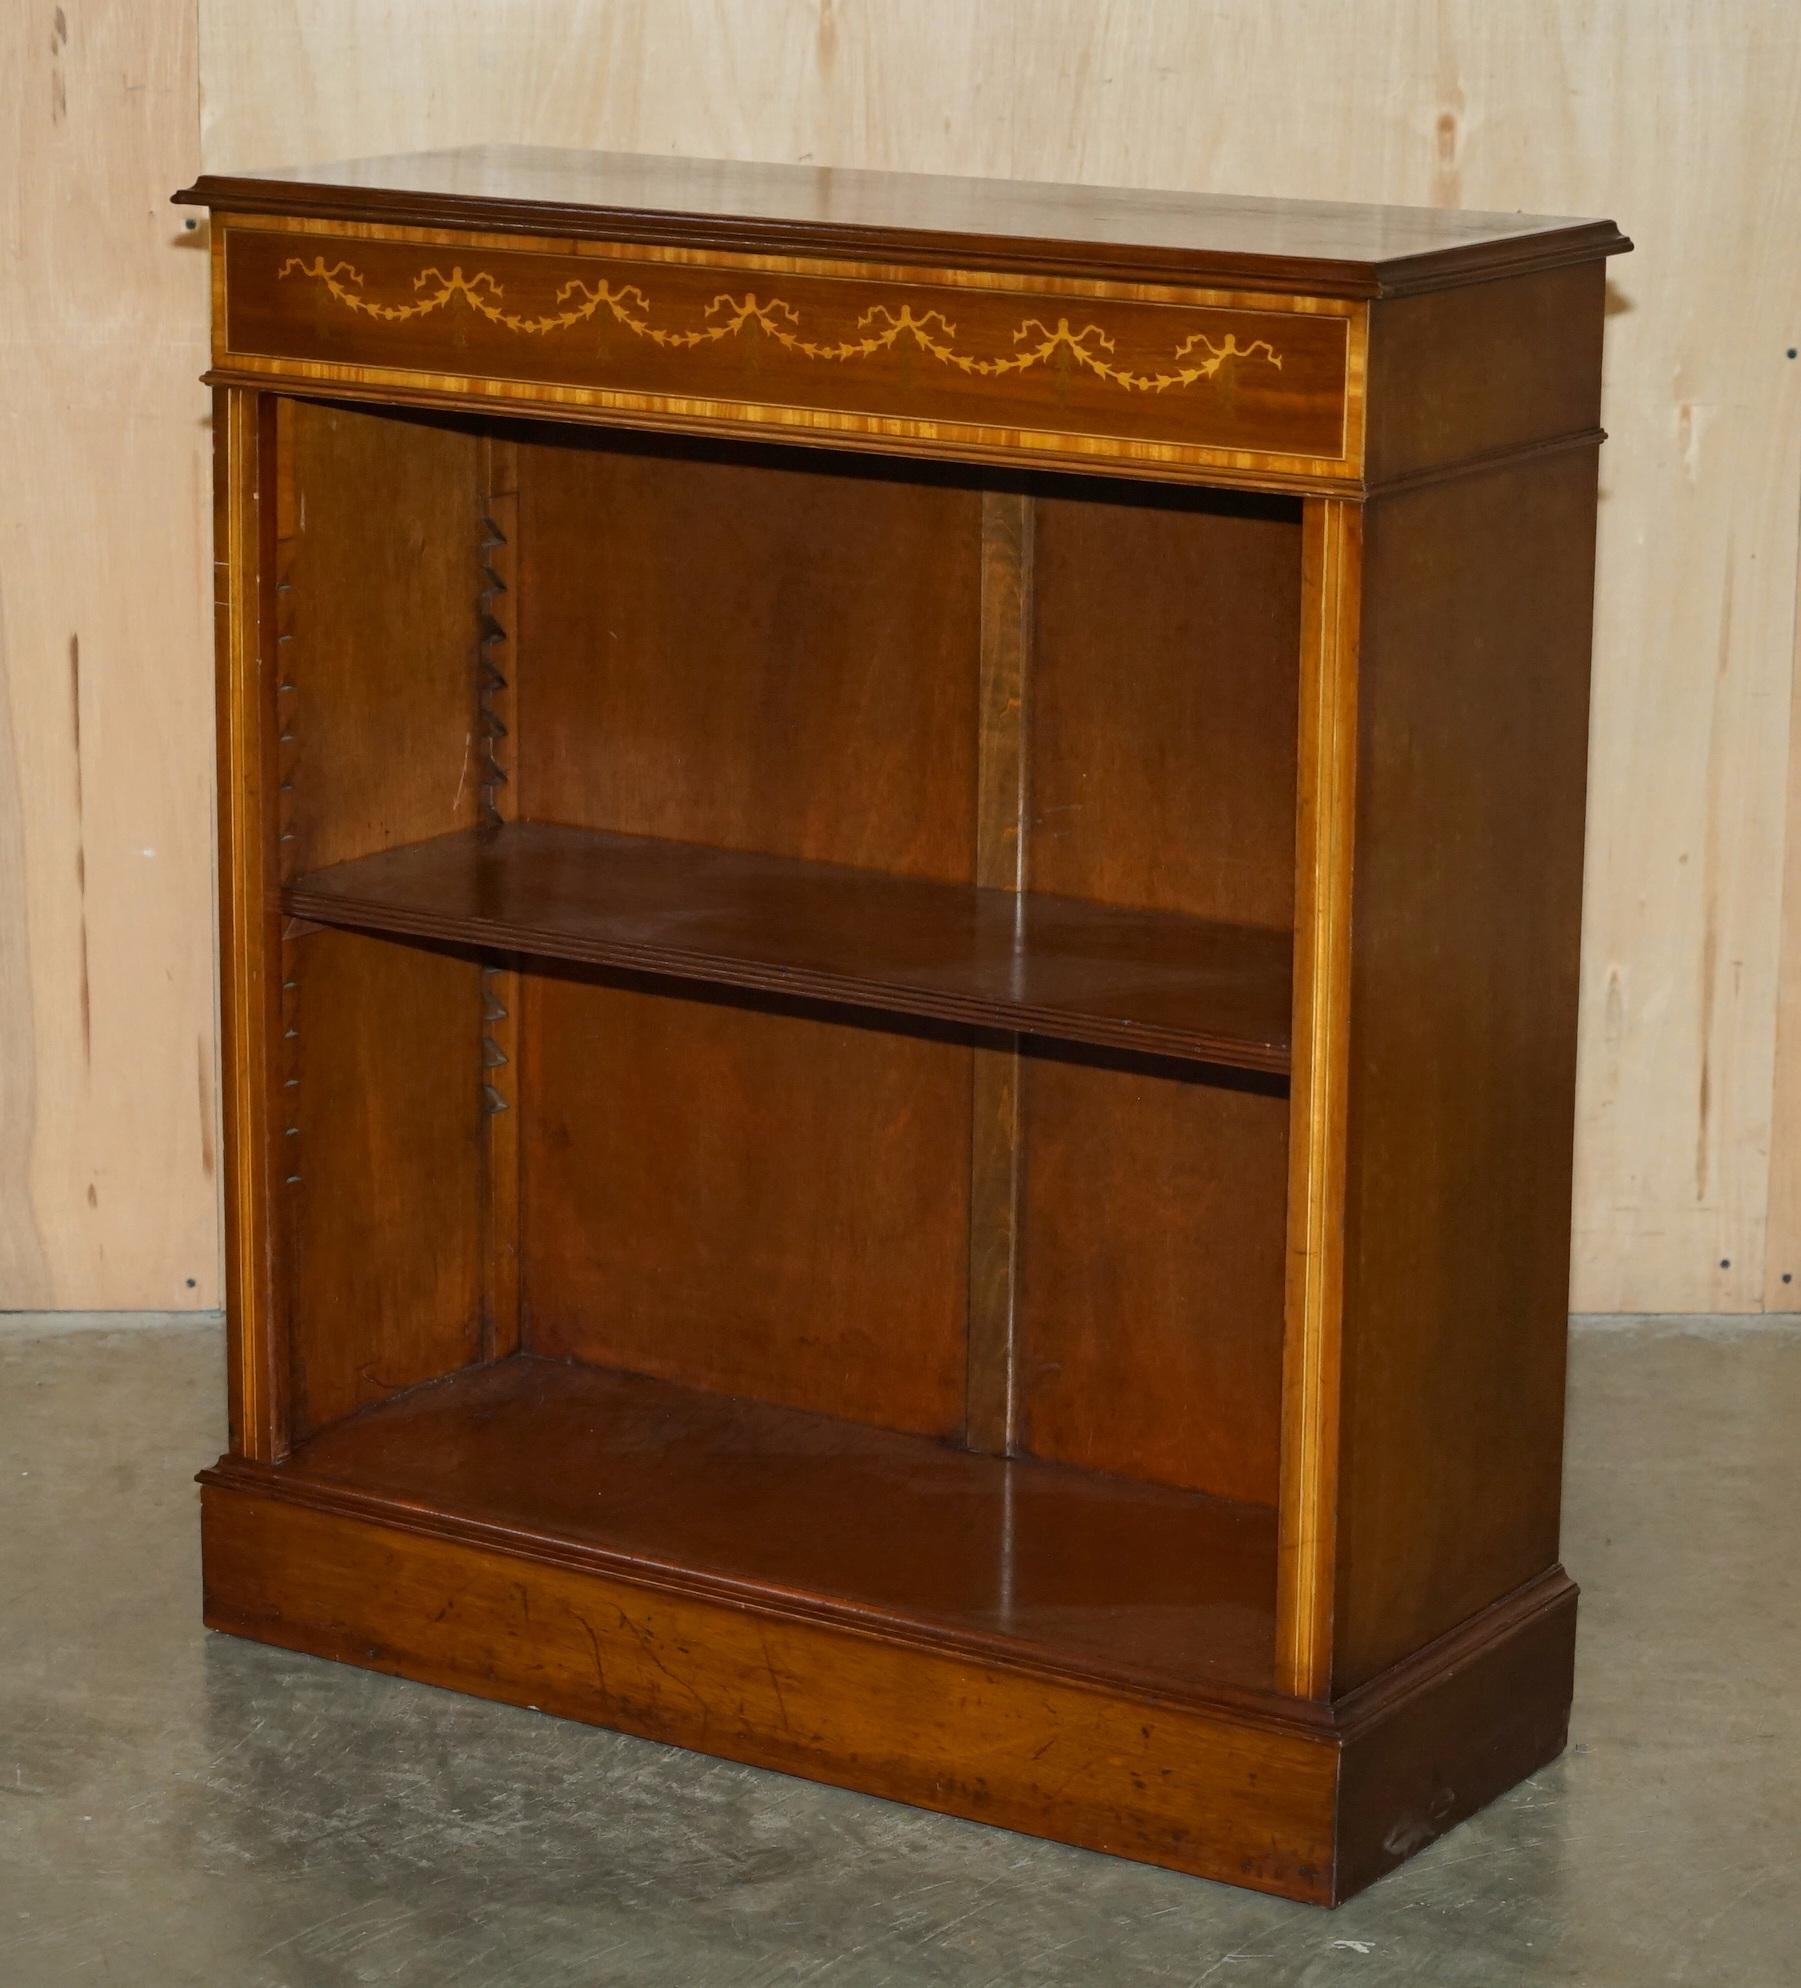 Sheraton EXQUISITELY INLAID BRiGHTS OF NETTLEBED SHERATON REVIVAL DWARF OPEN BOOKCASE For Sale